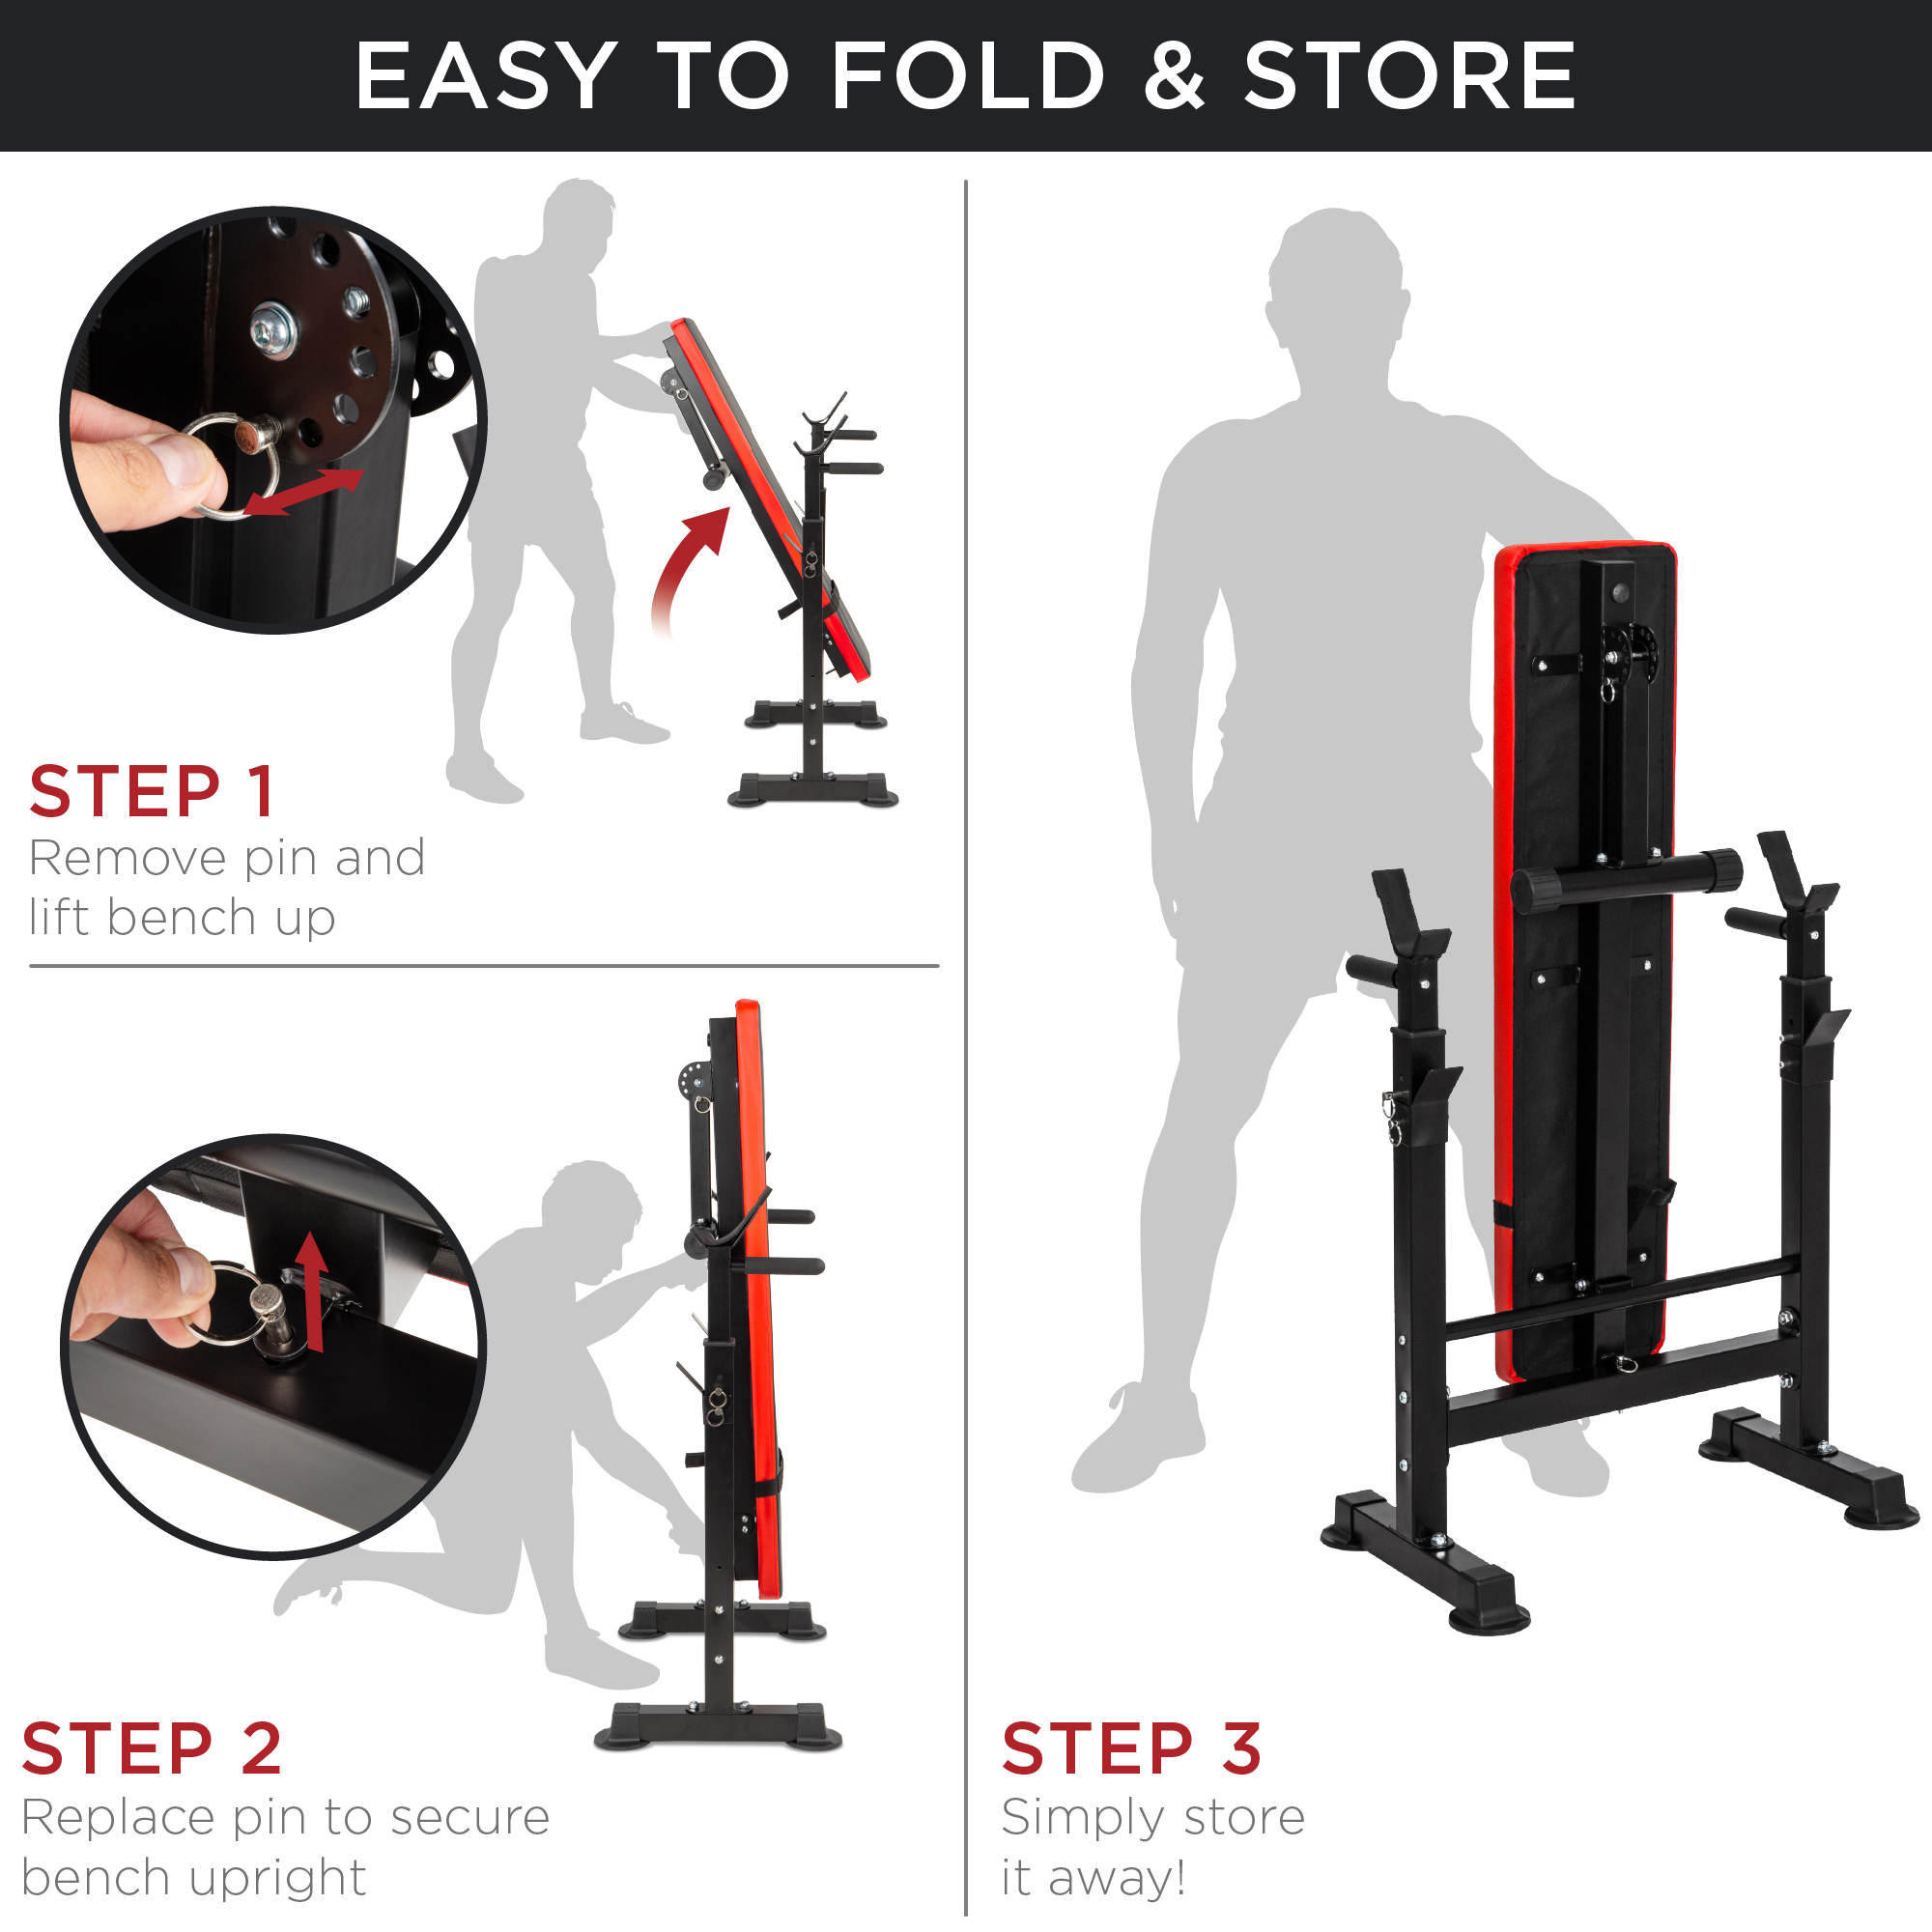 Best Choice Products Adjustable Folding Fitness Barbell Rack & Weight Bench for Home Gym, Strength Training - Black/Red - image 5 of 6